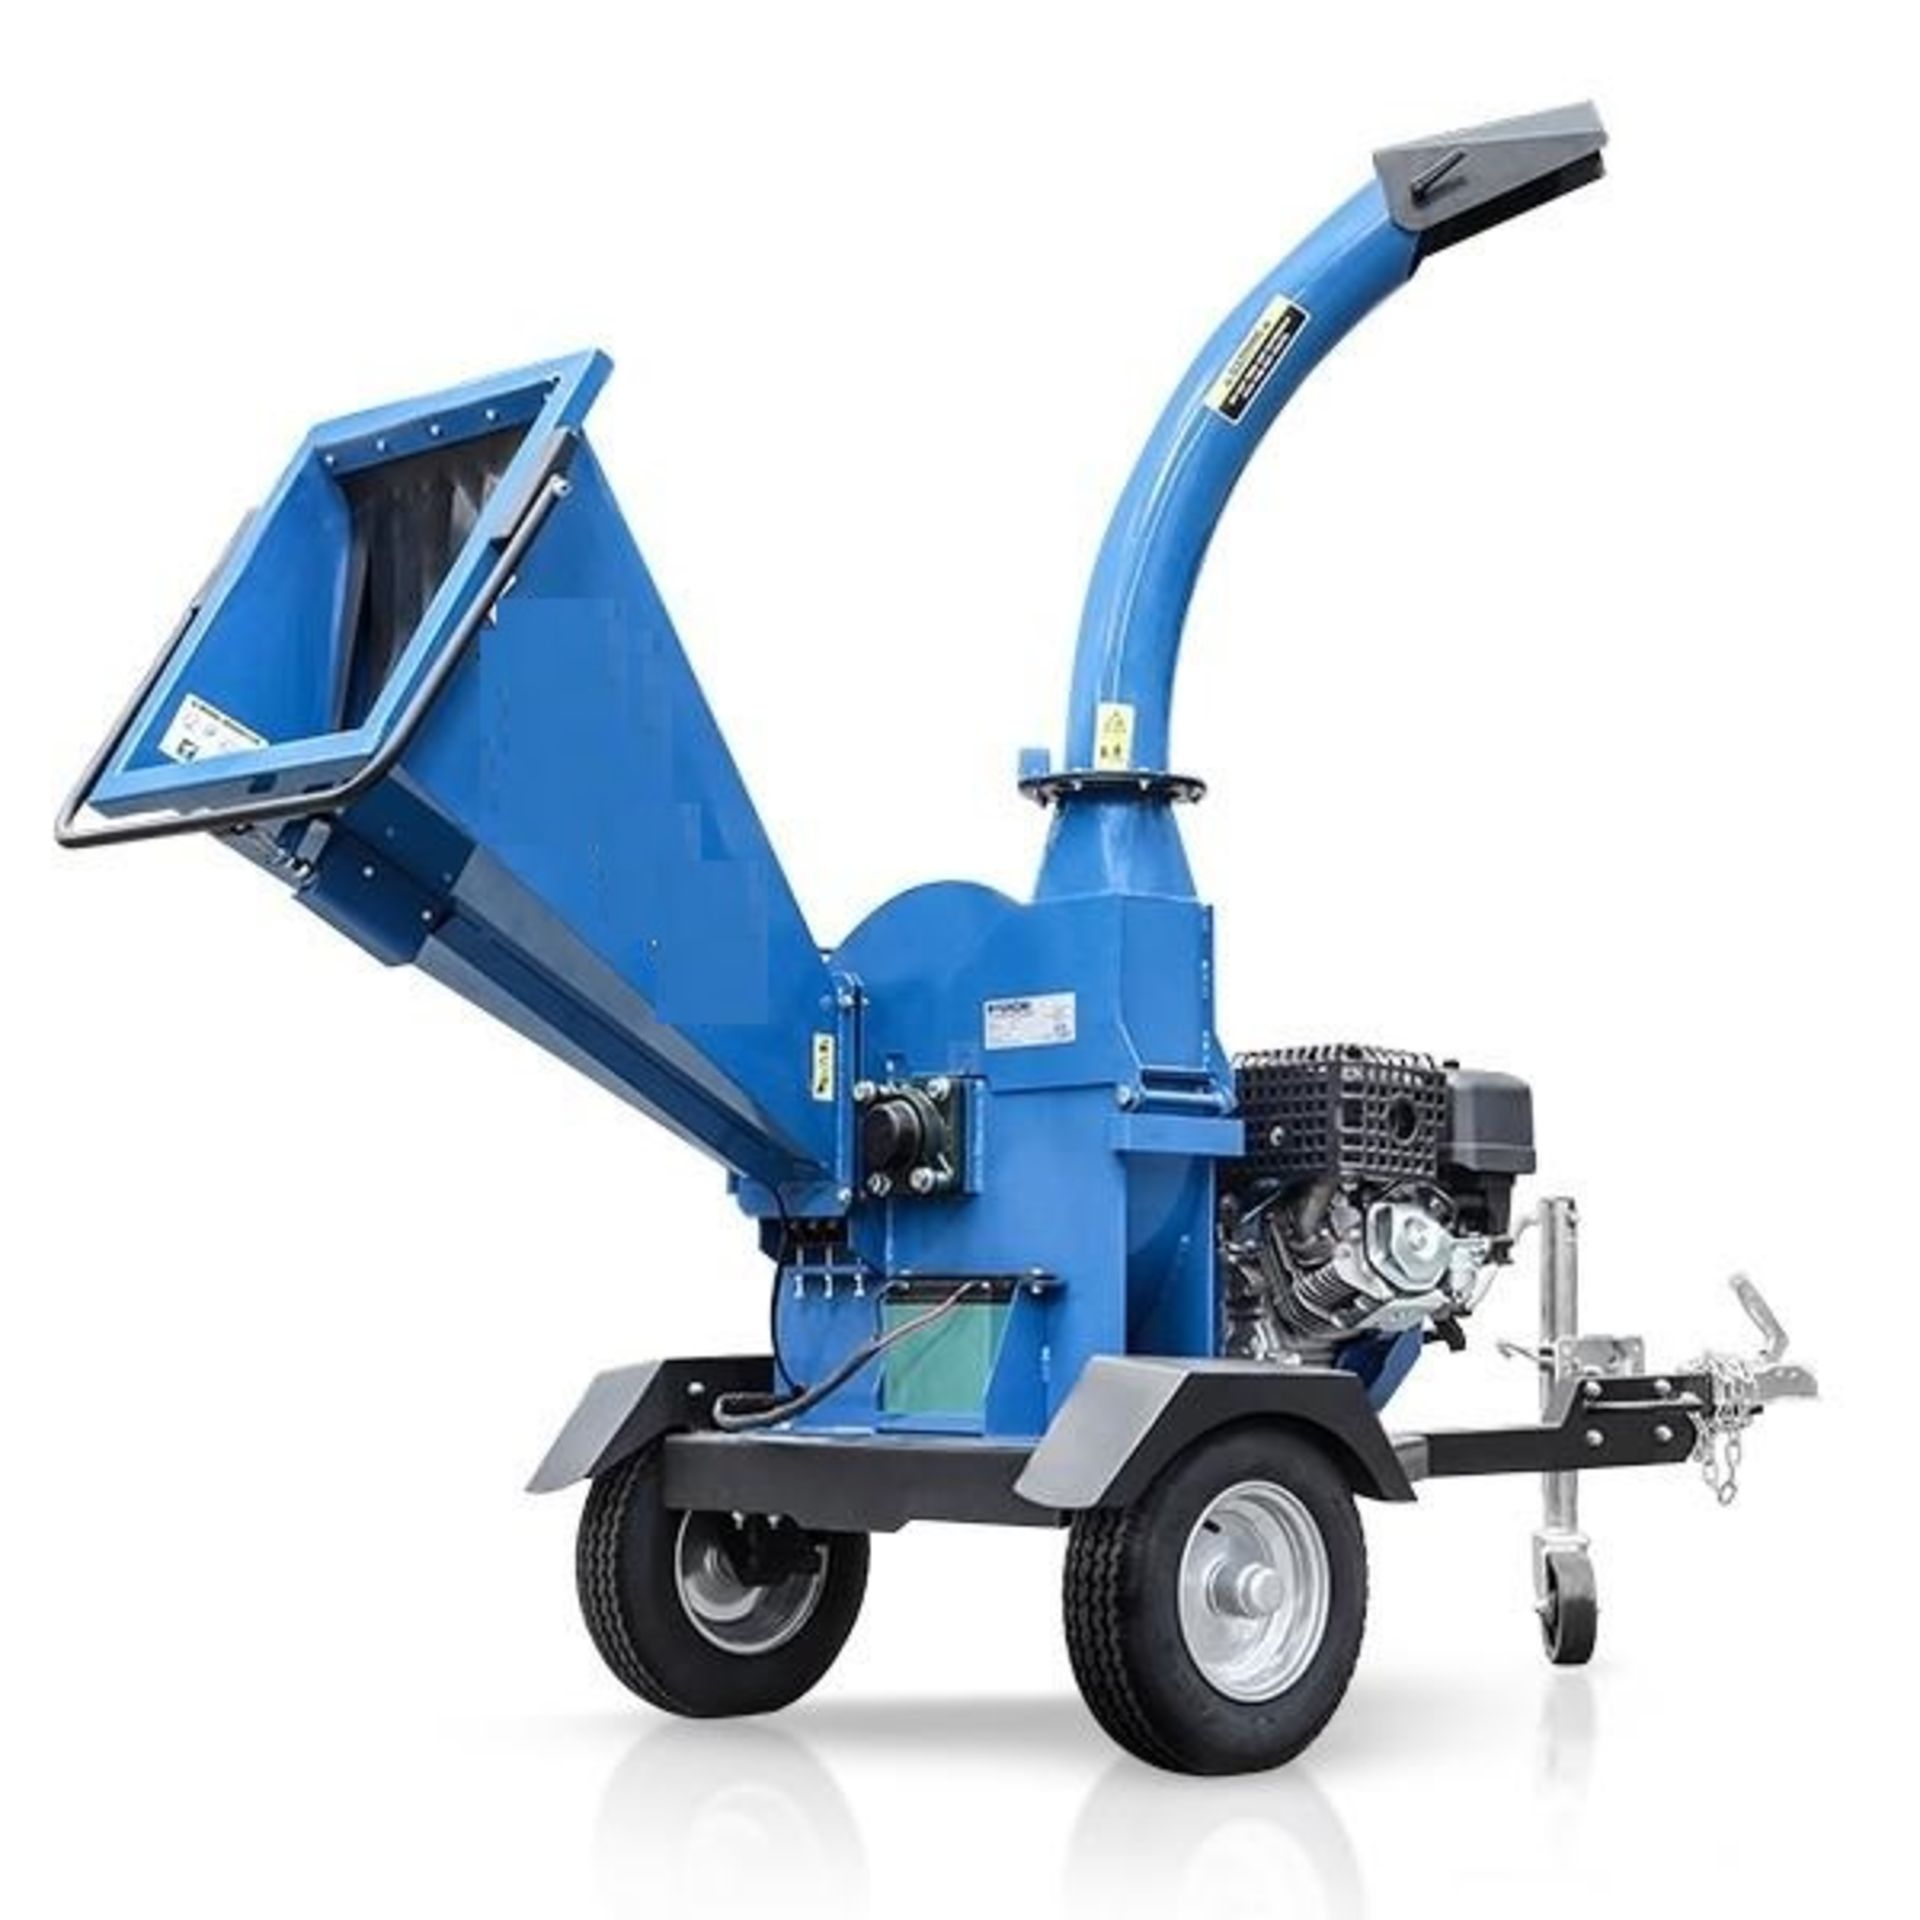 NEW AND UNUSED 15100TE 420cc 4.5" TOWABLE PETROL WOOD CHIPPER, RRP OVER £2400 *PLUS VAT* - Image 4 of 5